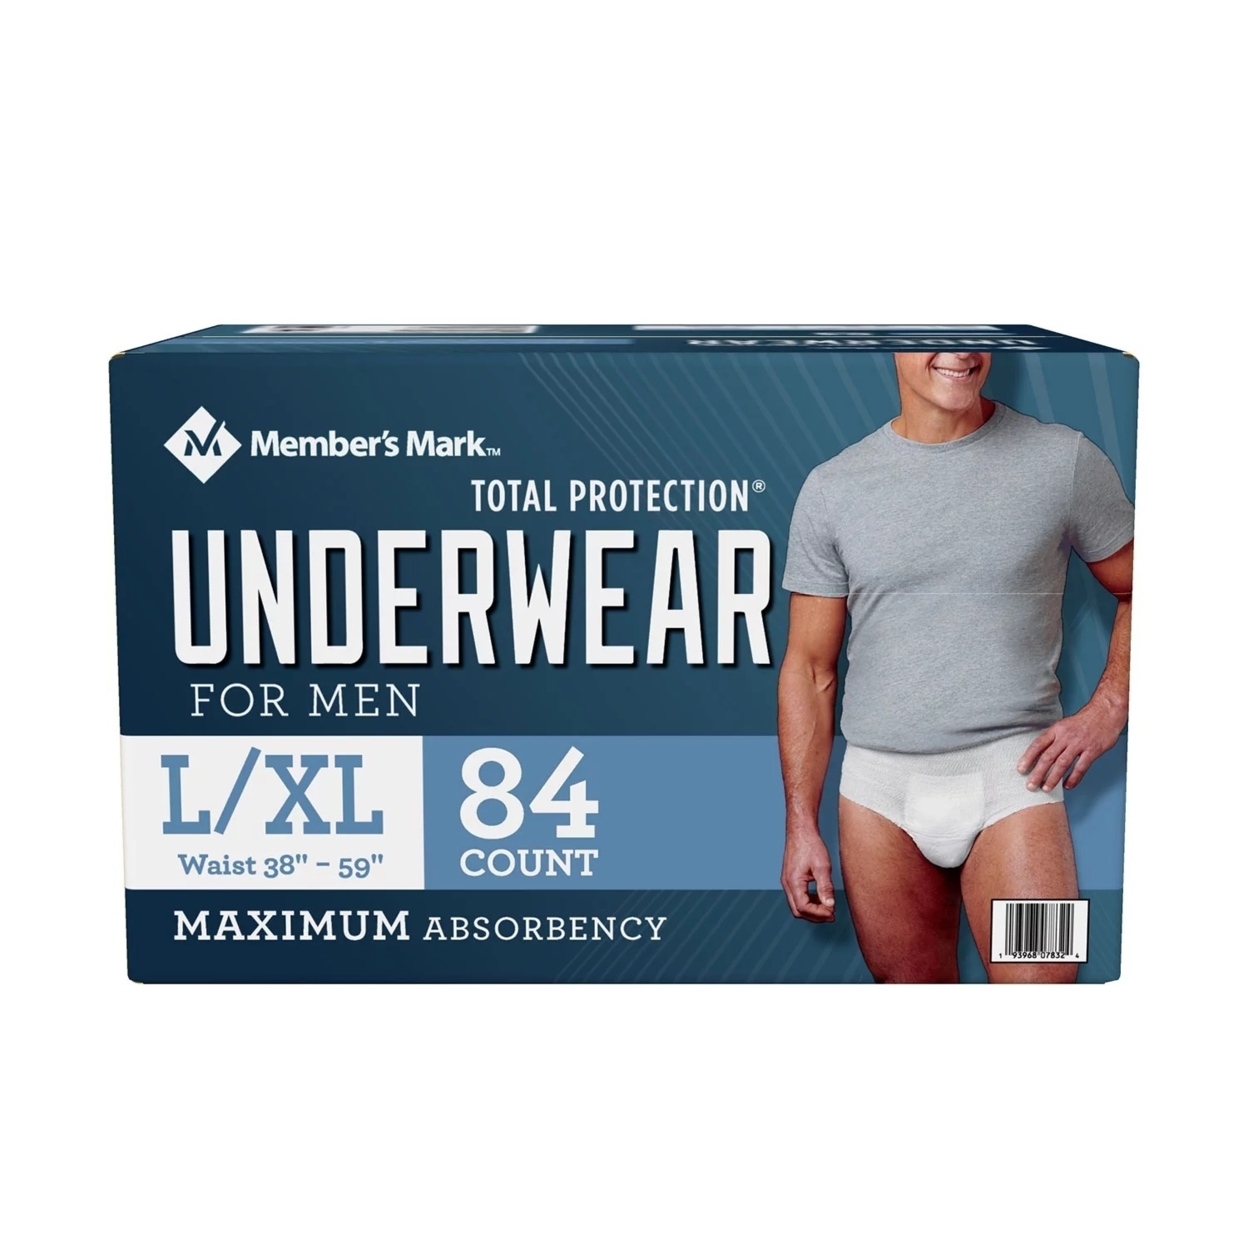 Member's Mark Total Protection Underwear For Men, Large/Extra Large (84 Count)